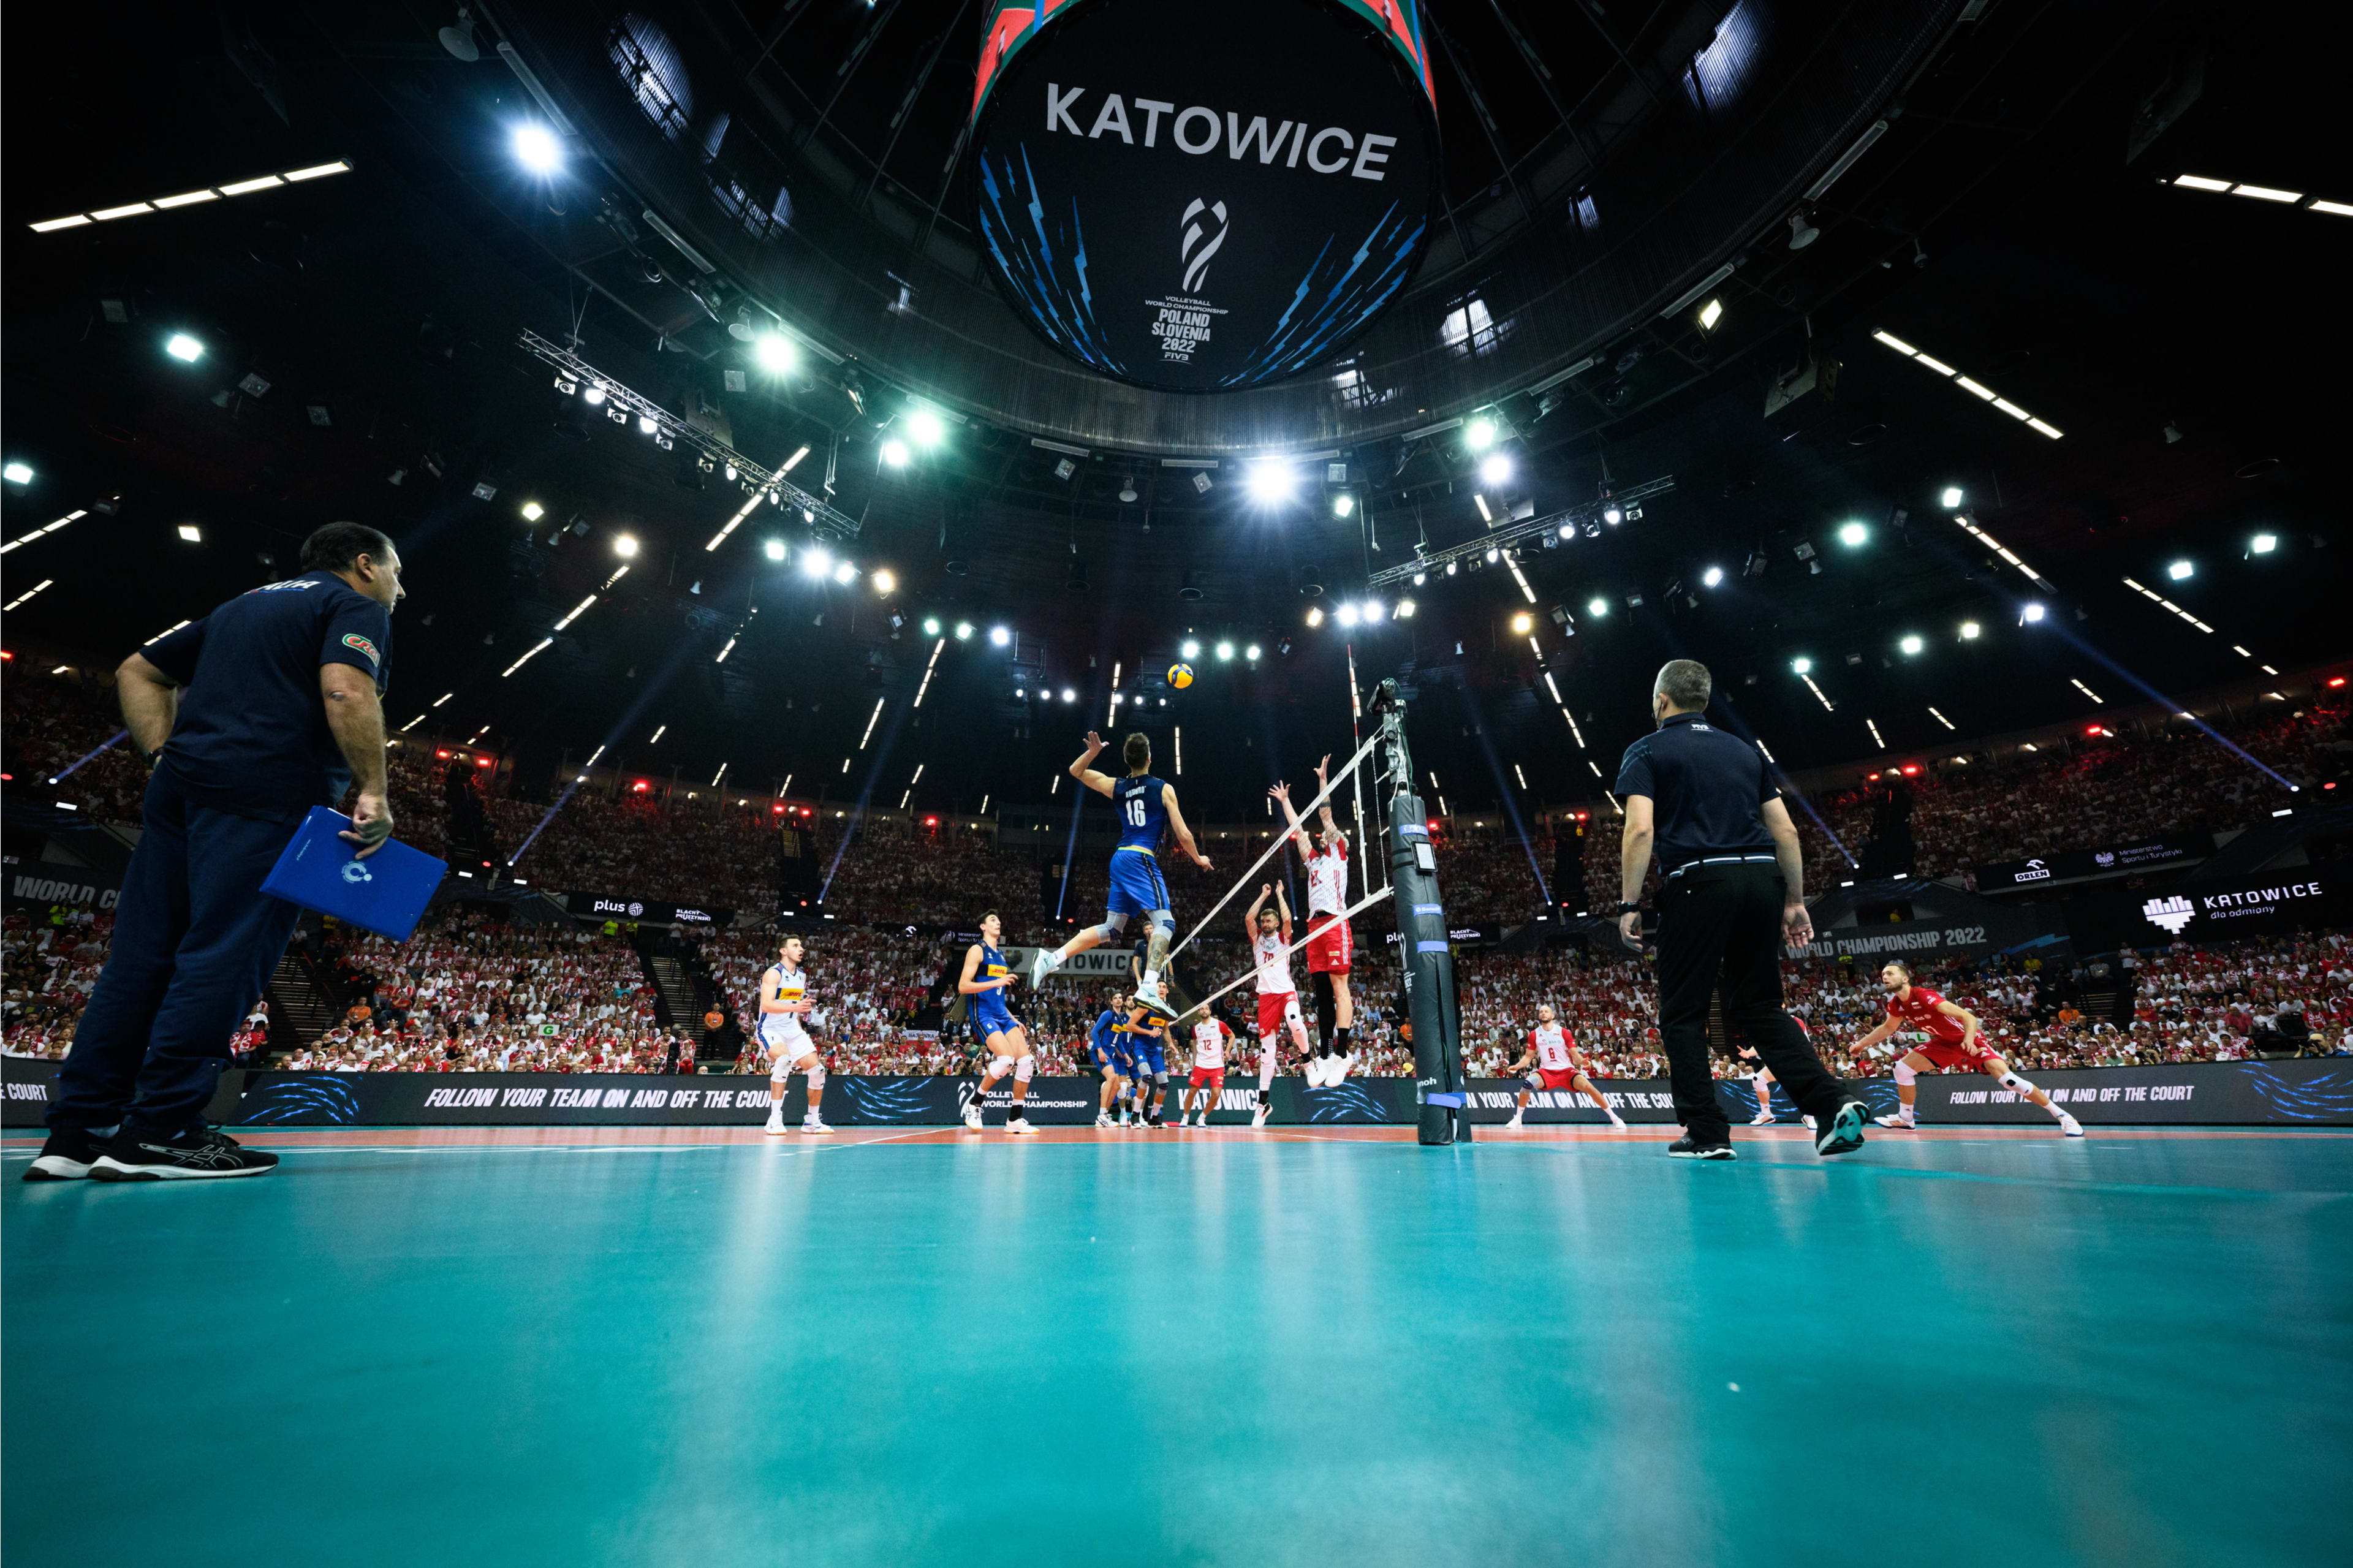 Mens Volleyball World Championship watched by millions volleyballworld 